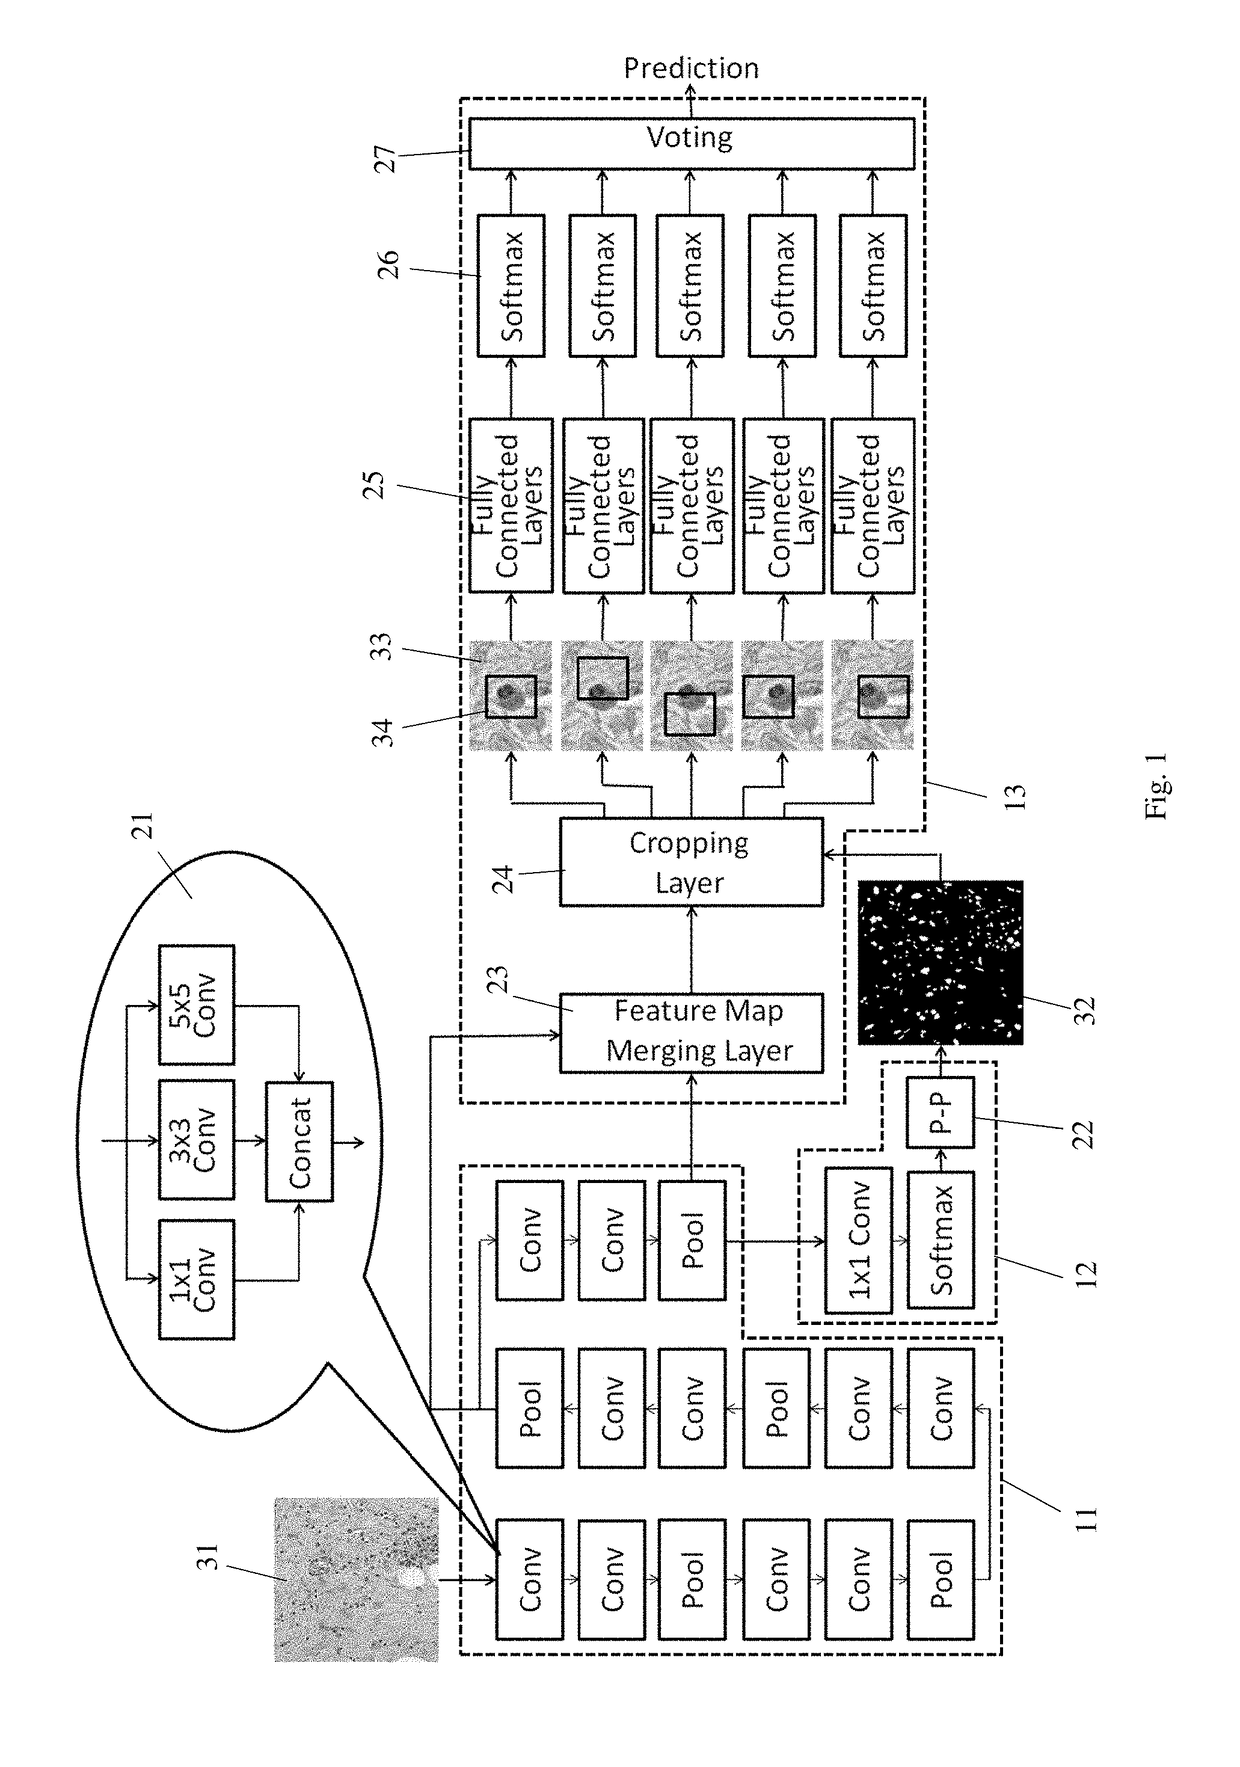 Method and system for detection and classification of cells using convolutional neural networks